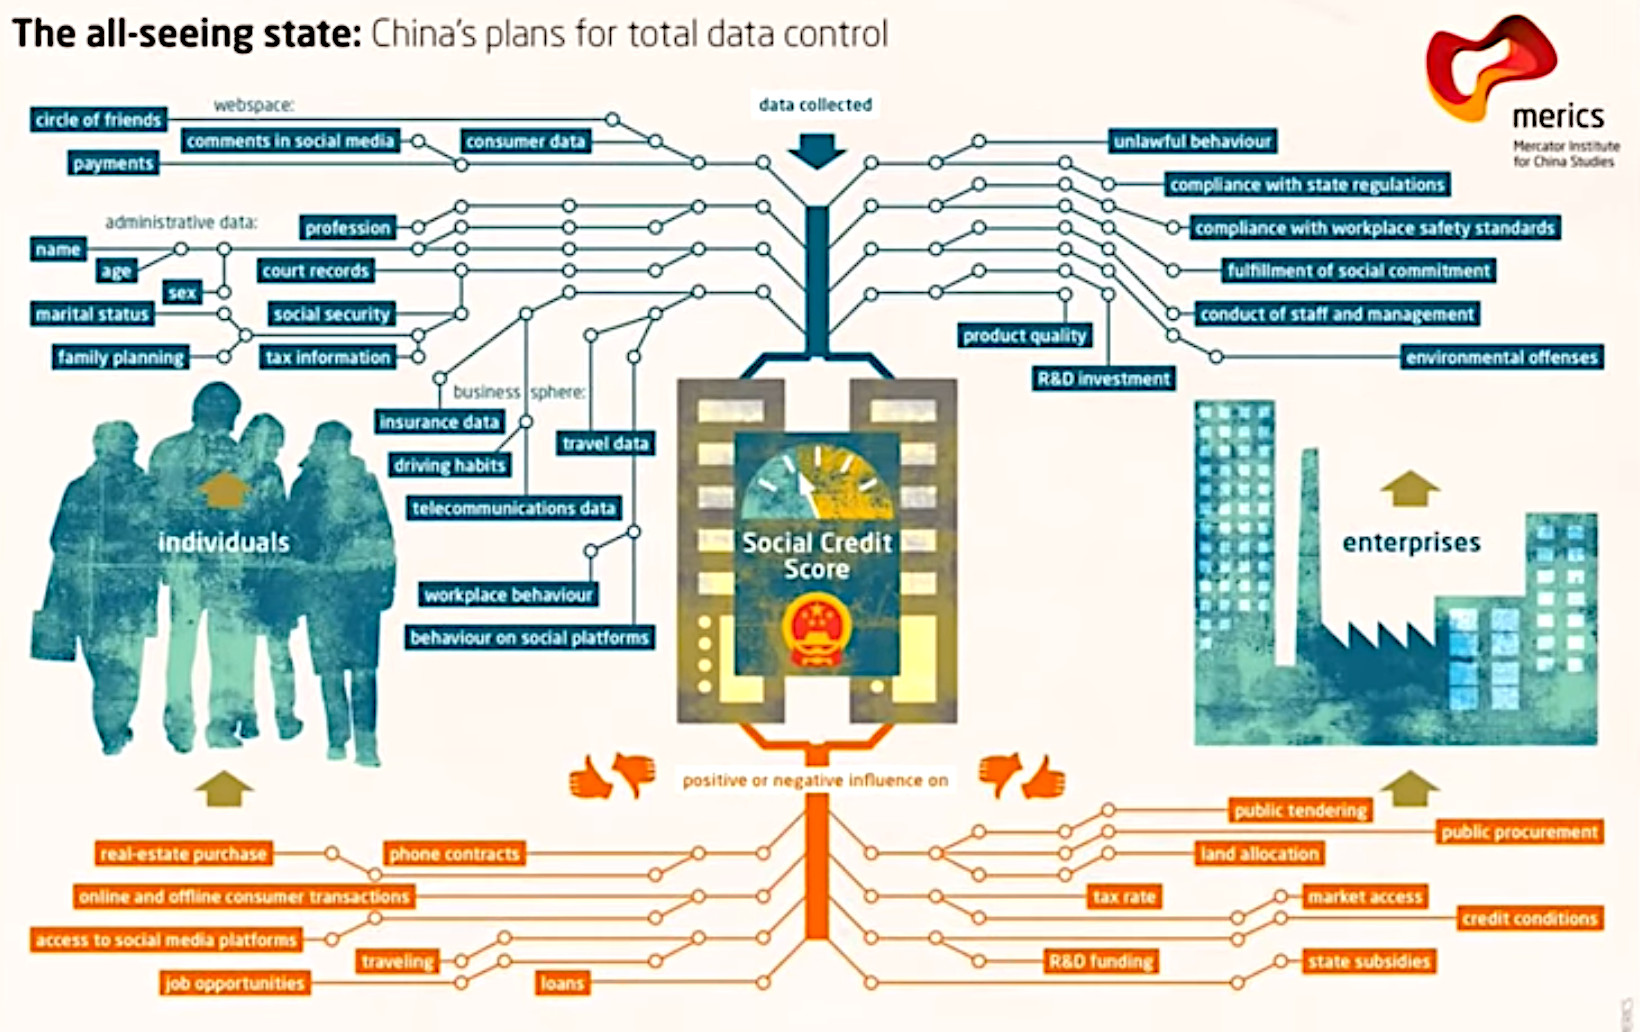 China’s SkyNet & plans for total data control – The BigData behind China social credit system – all seeing state